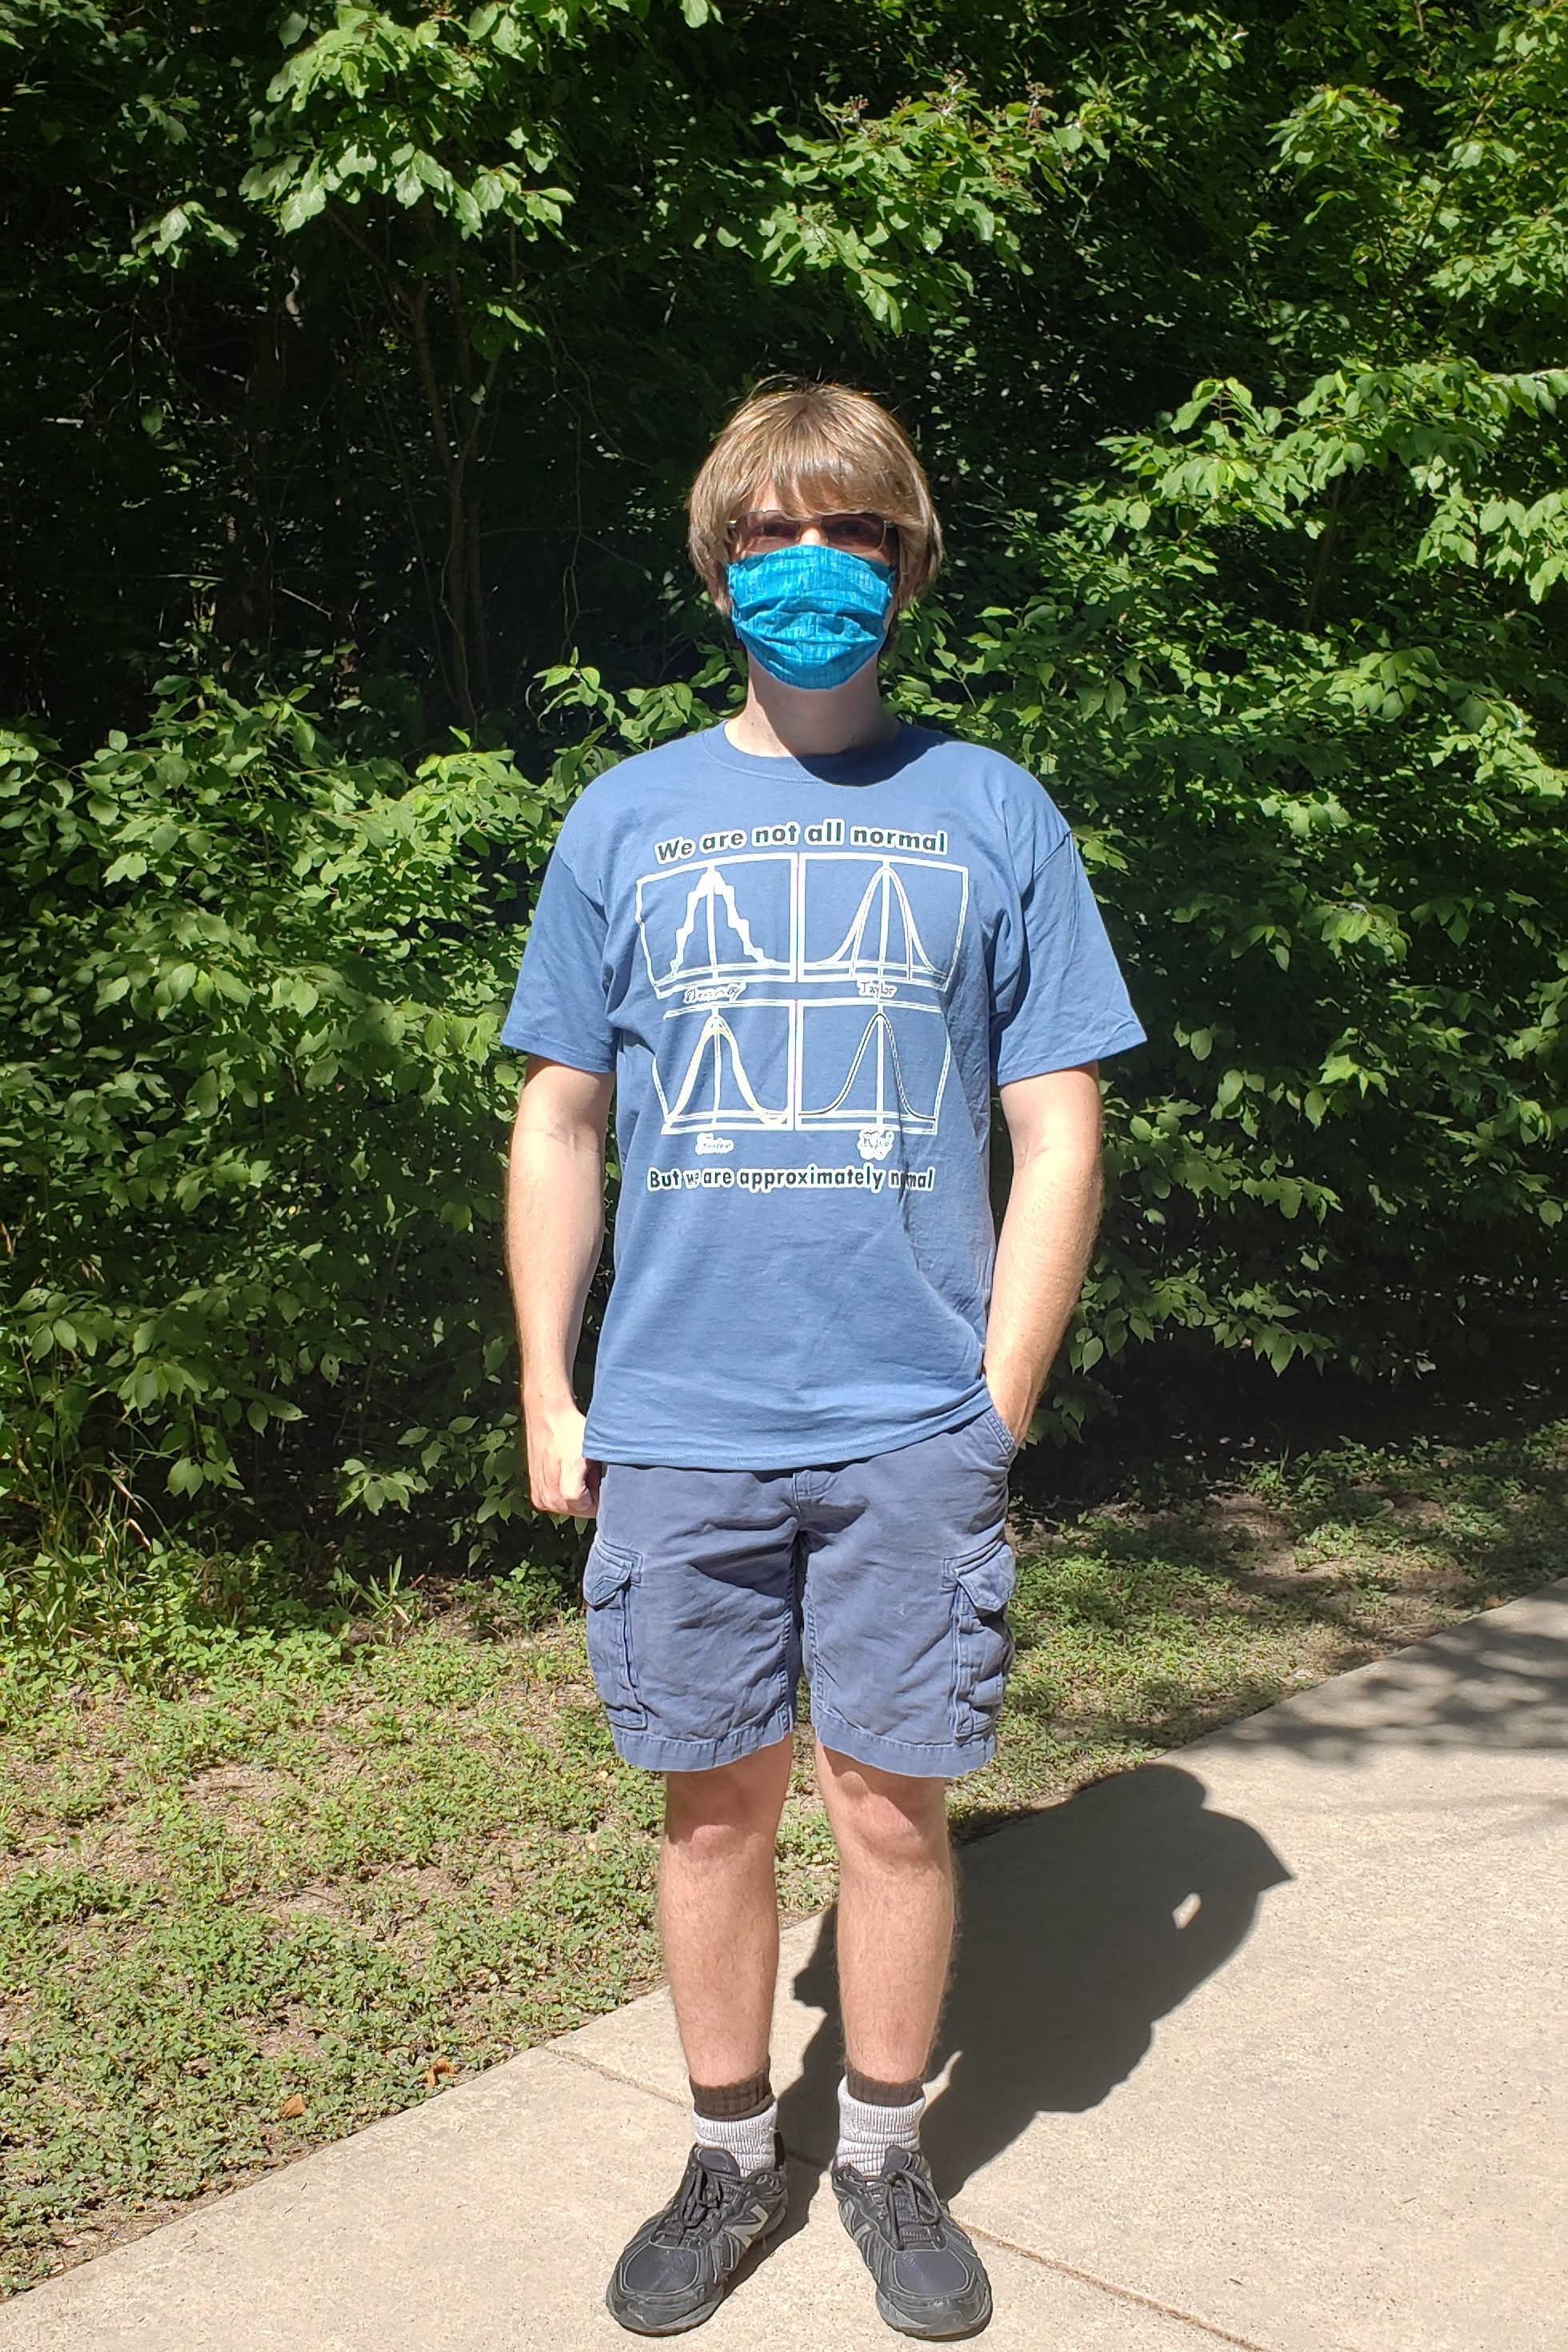 Picture of me in a park with a mask.